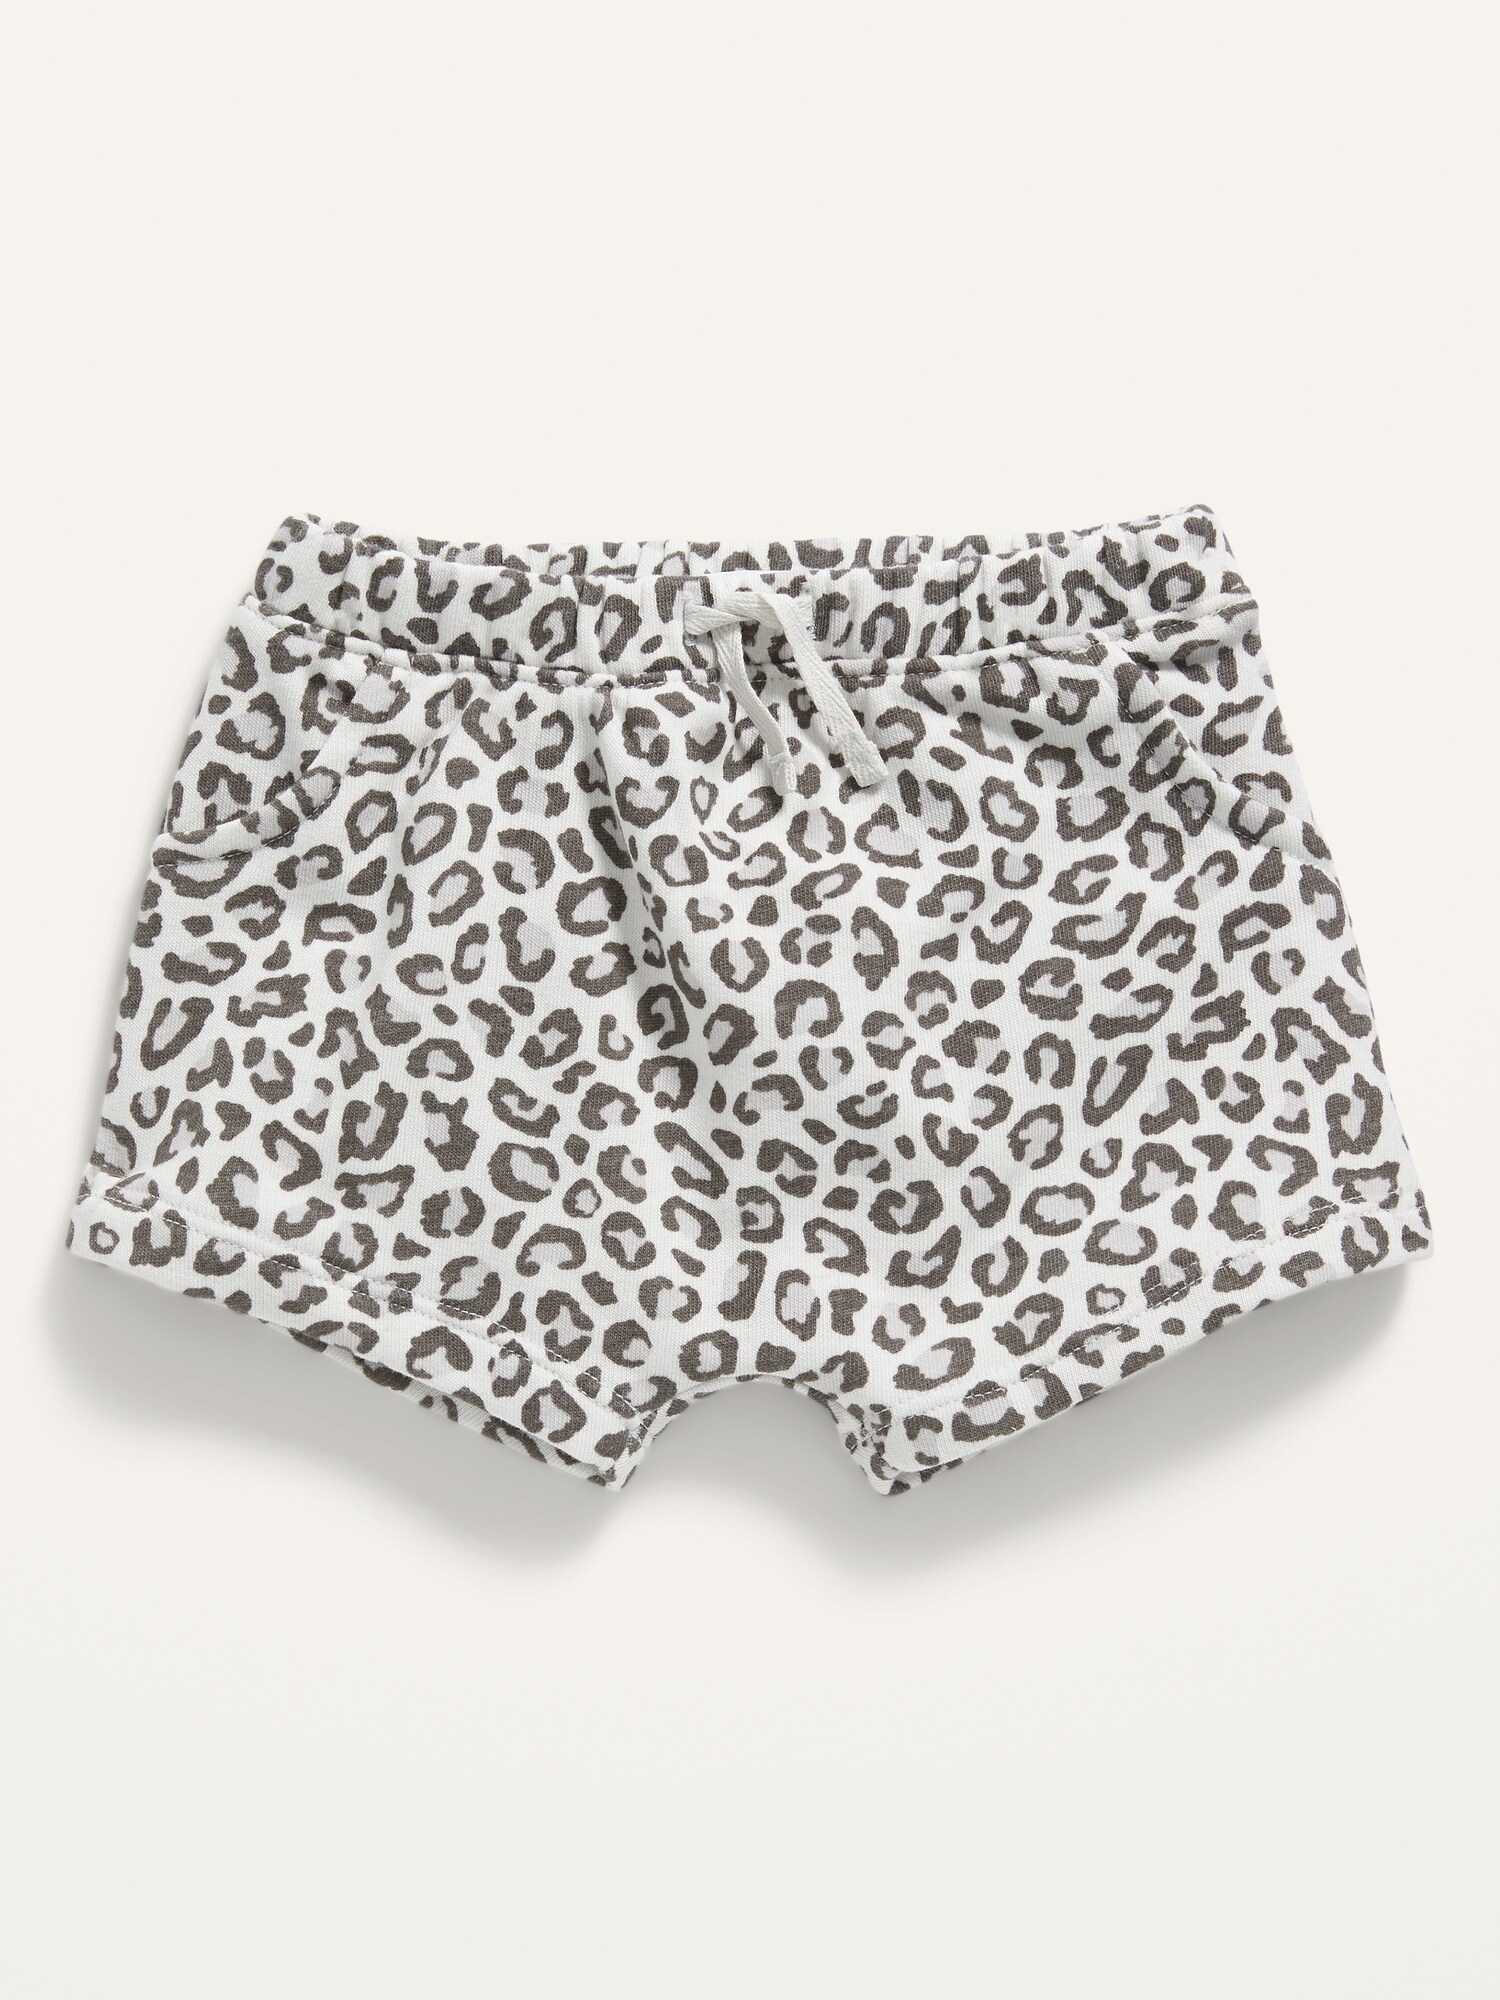 Unisex Printed Pull-On Shorts for Baby